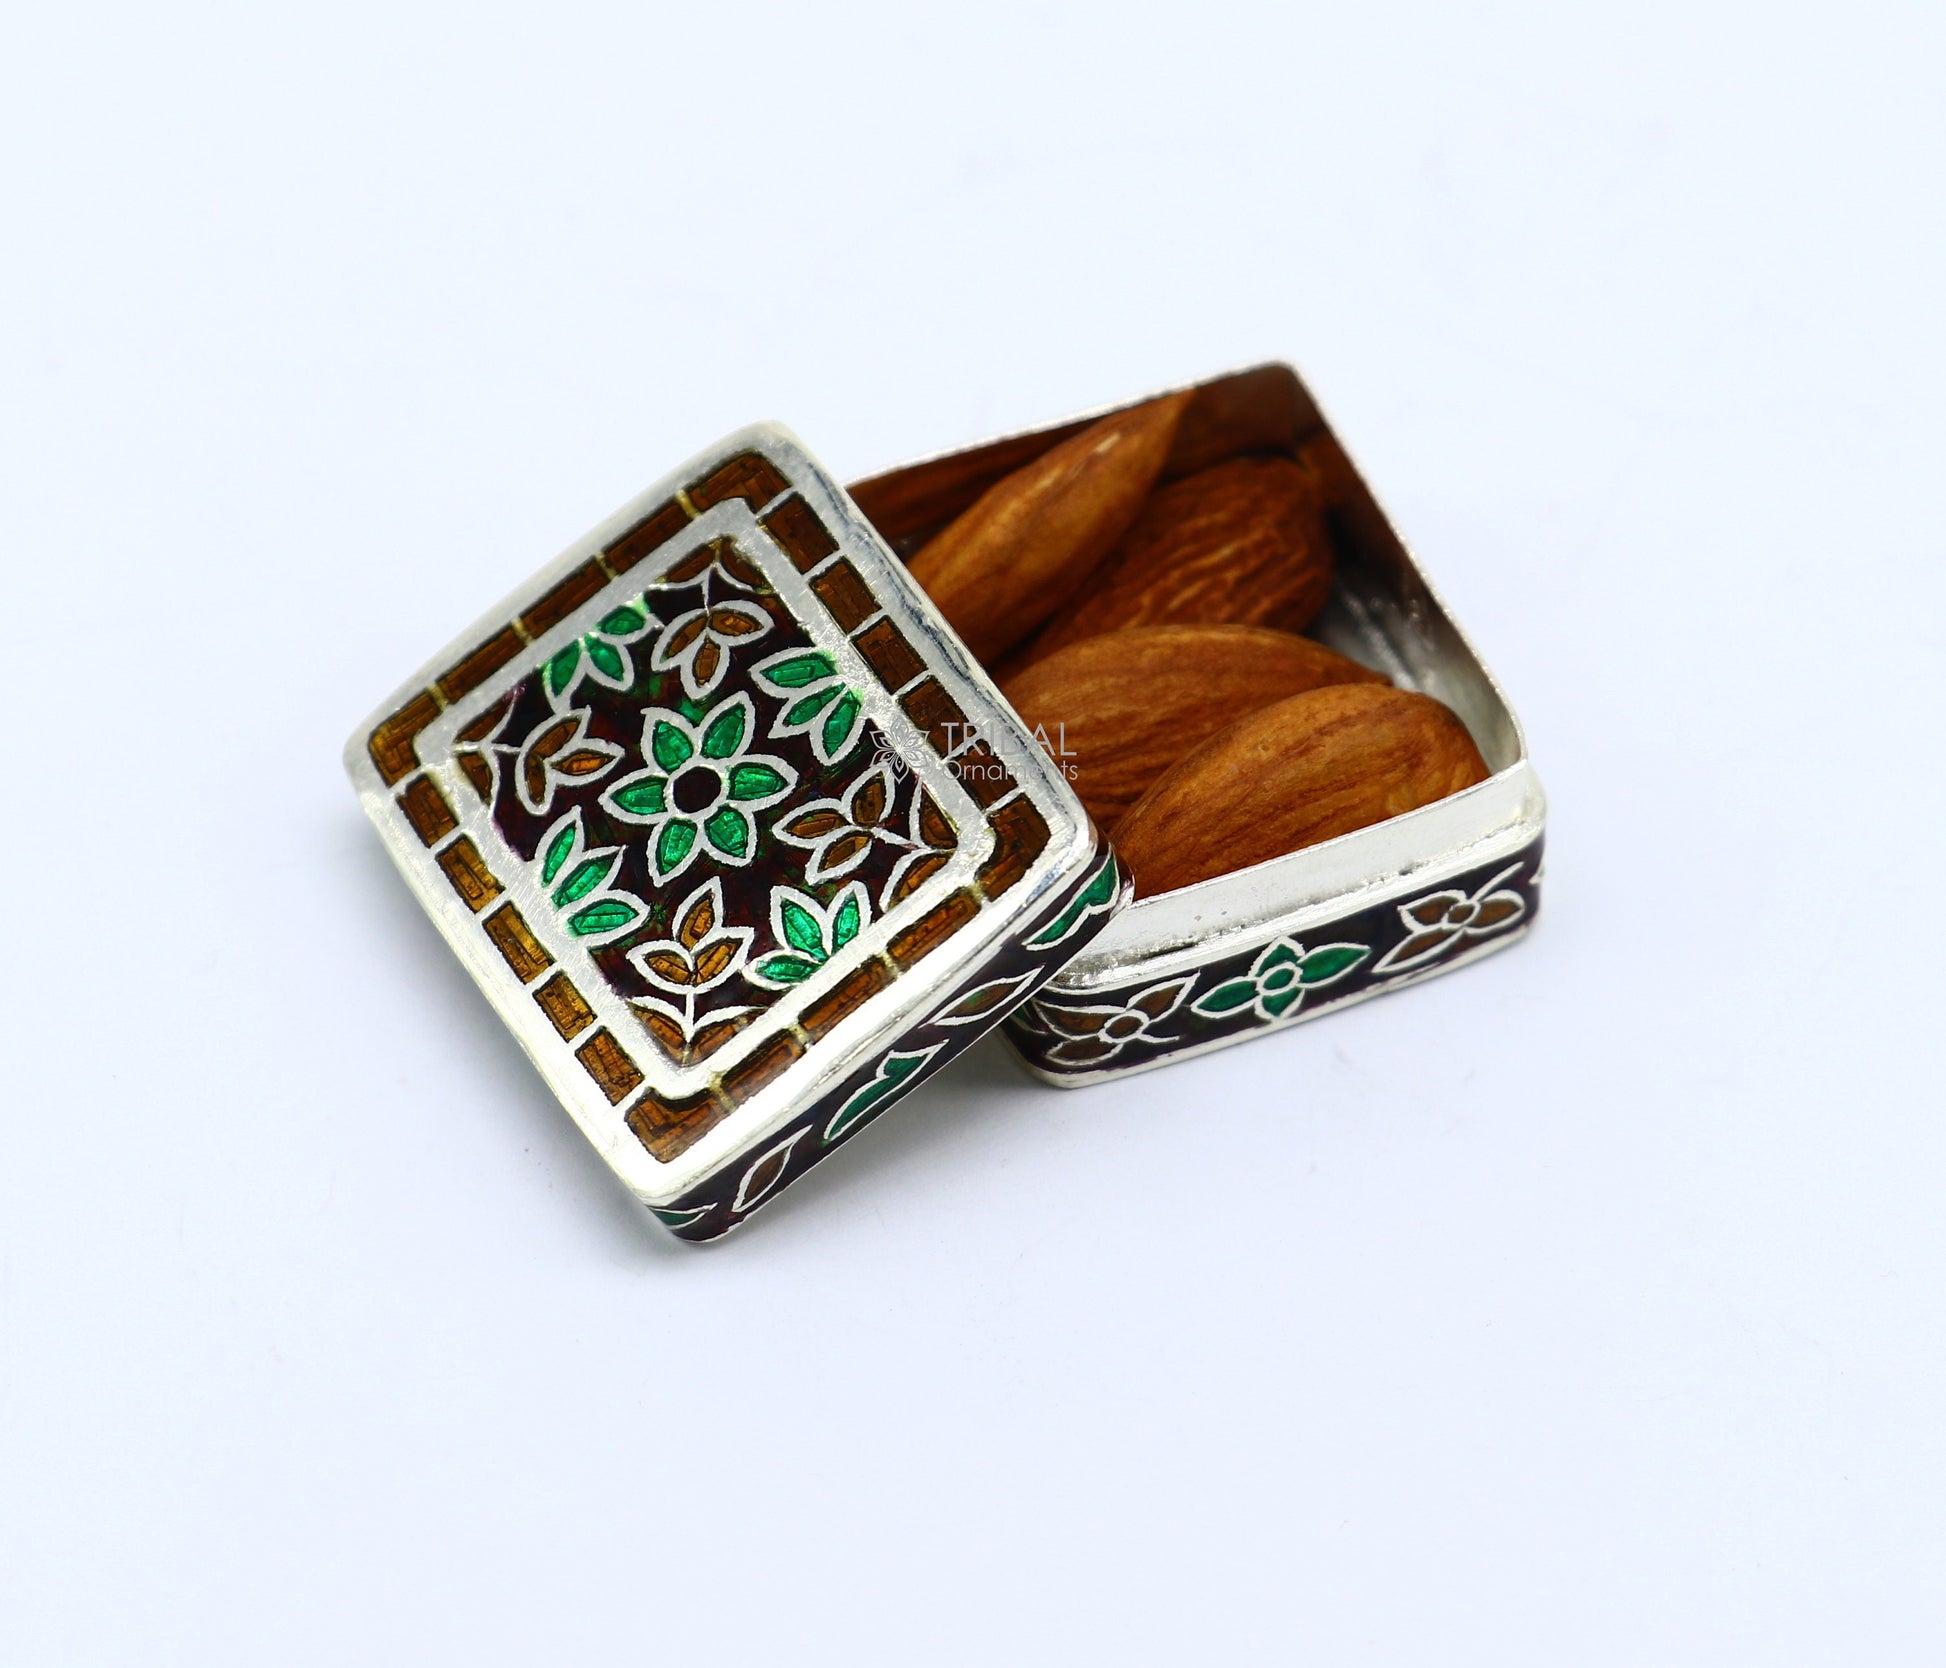 Trendy cultural style 925 sterling silver trinket box, casket box, container, Sindoor box vintage design enamel brides jewelry stb770 - TRIBAL ORNAMENTS